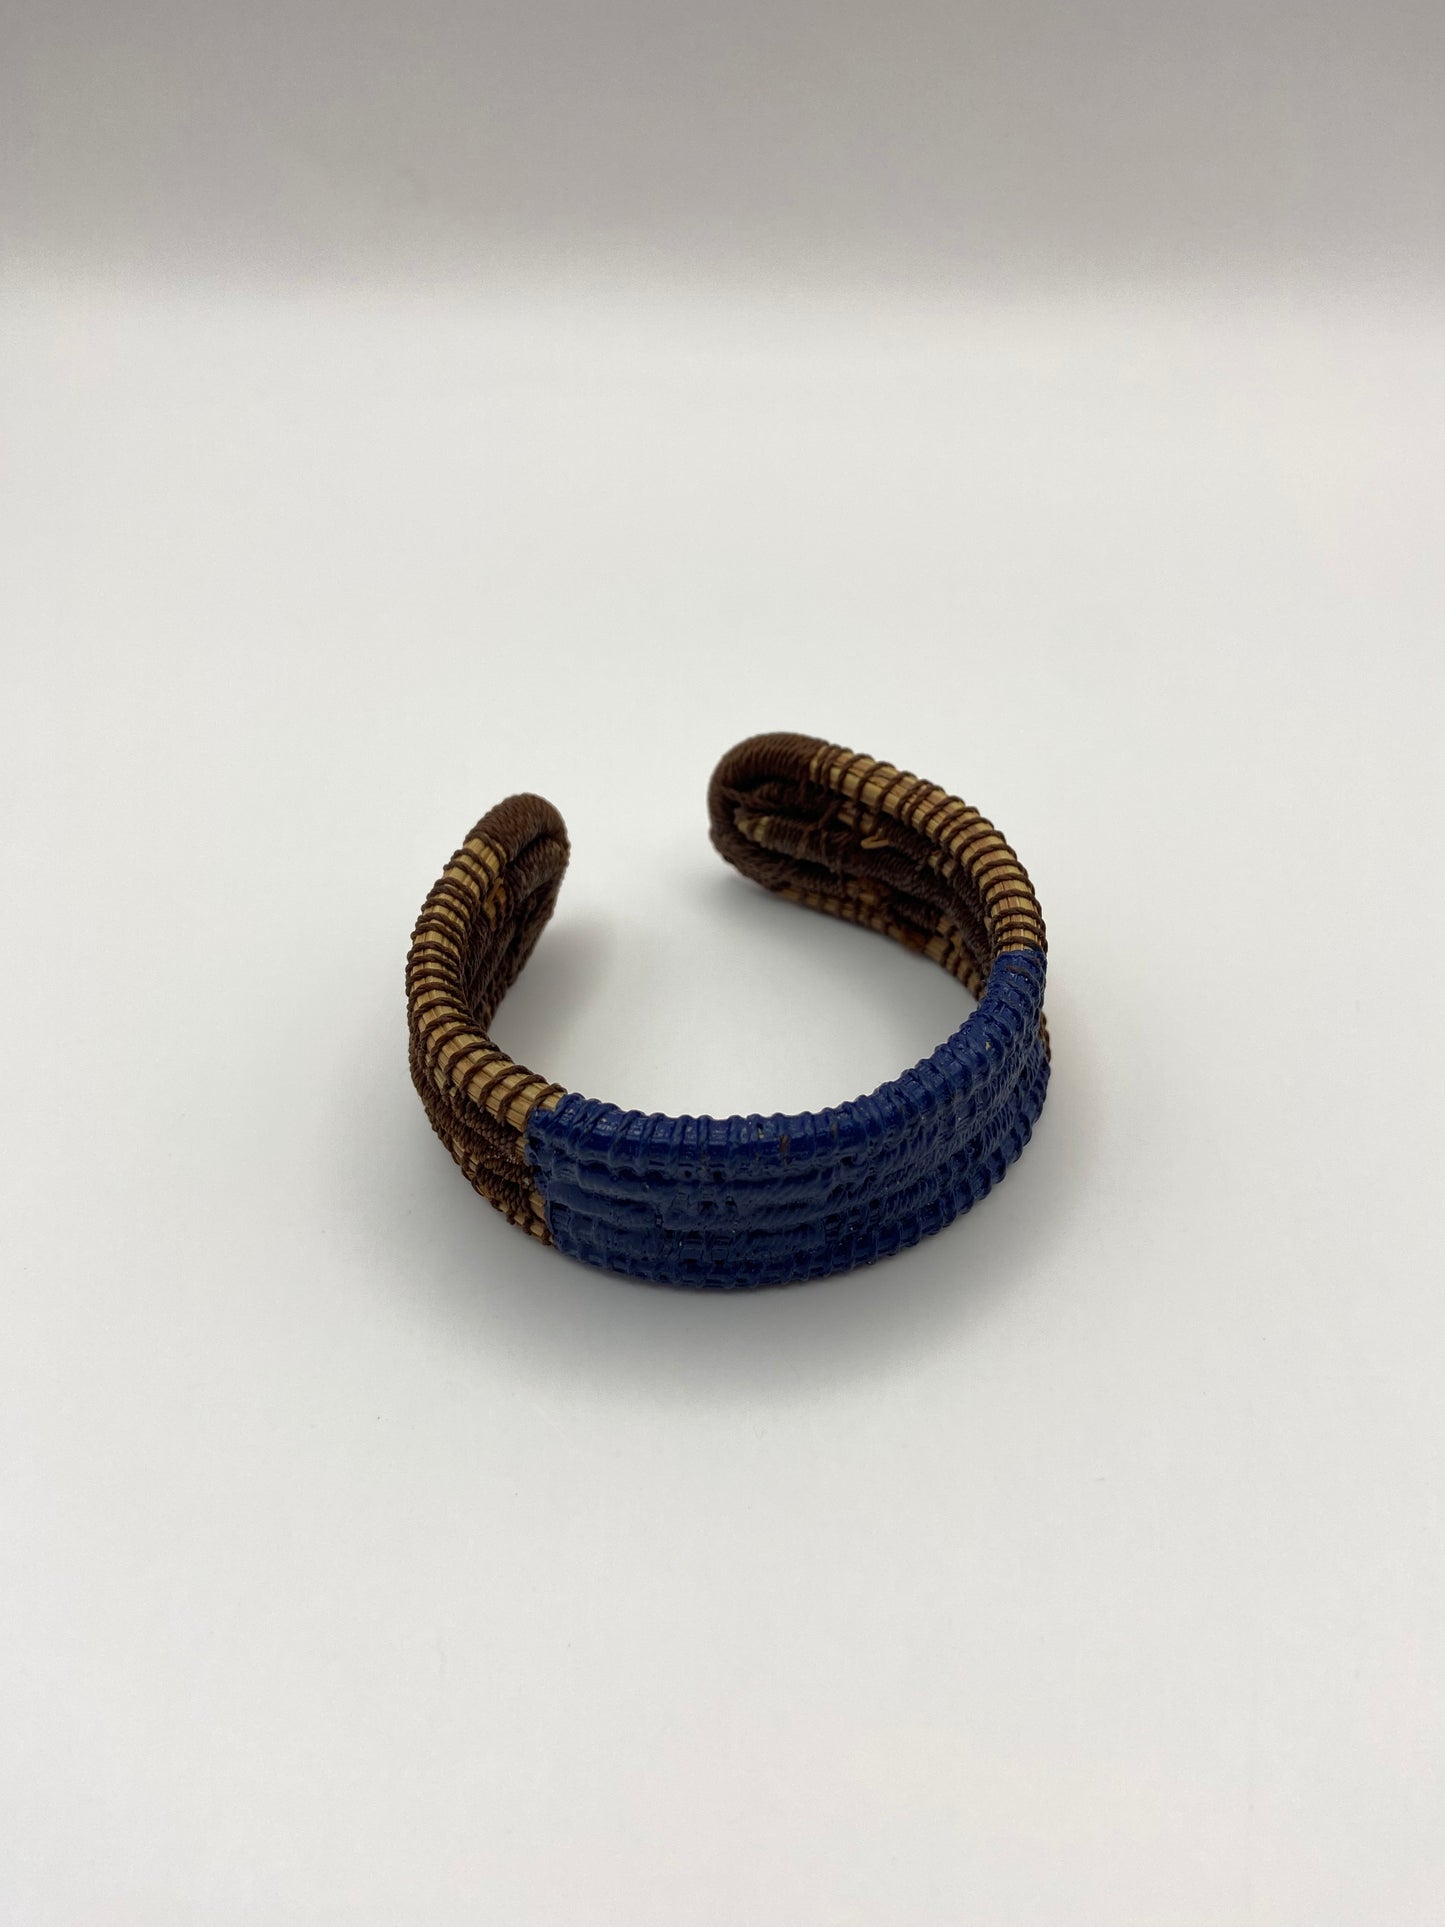 Handcrafted Cuff Bracelet